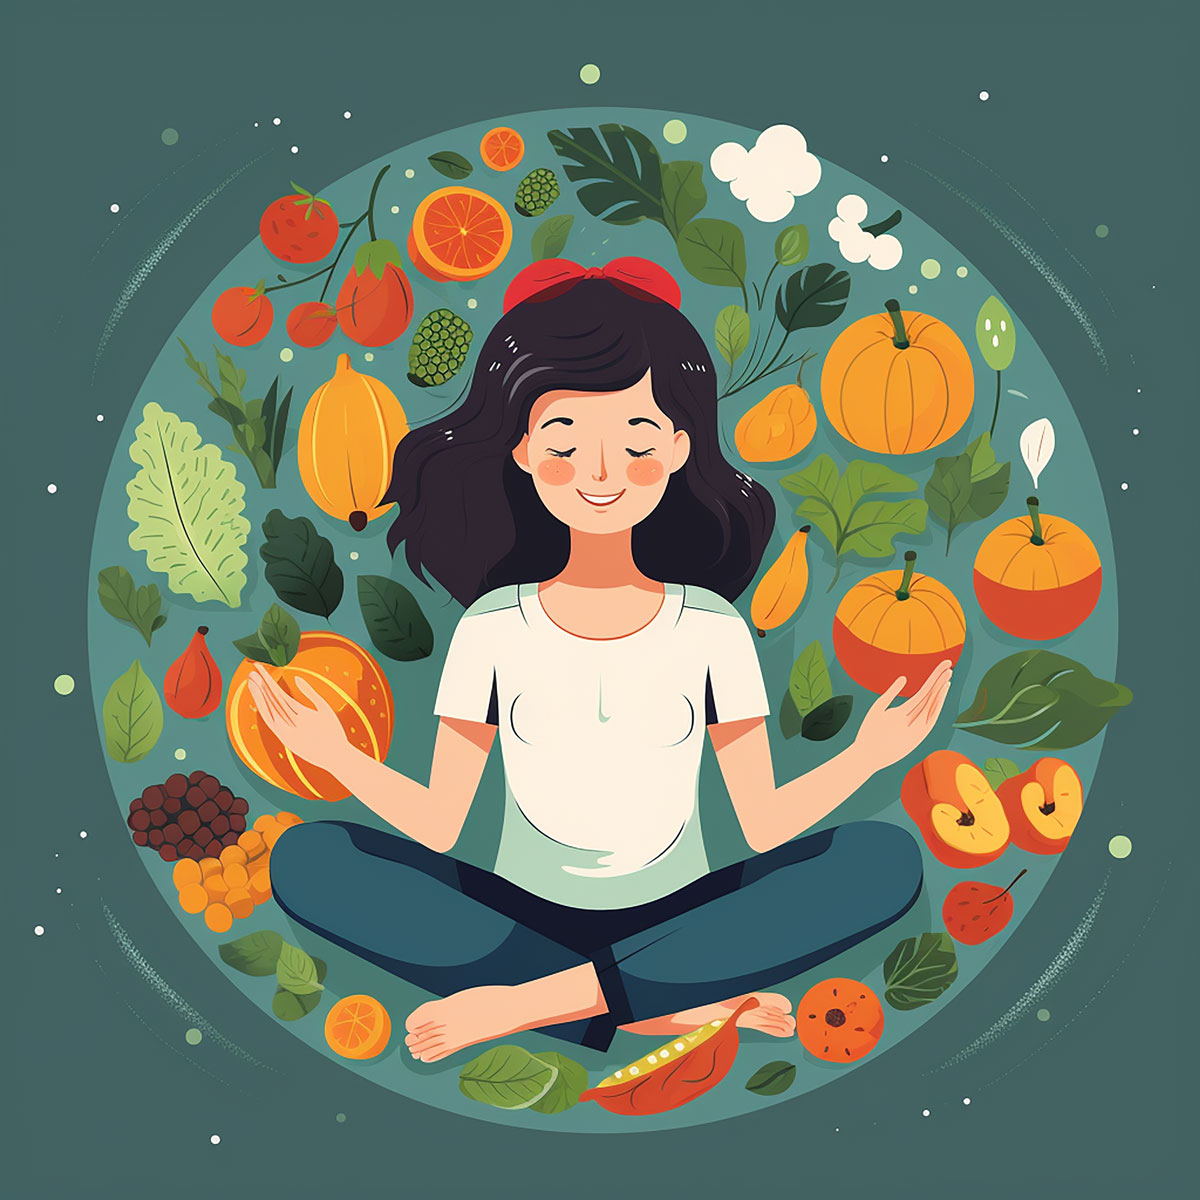 Mindful Eating: Nourish Your Body